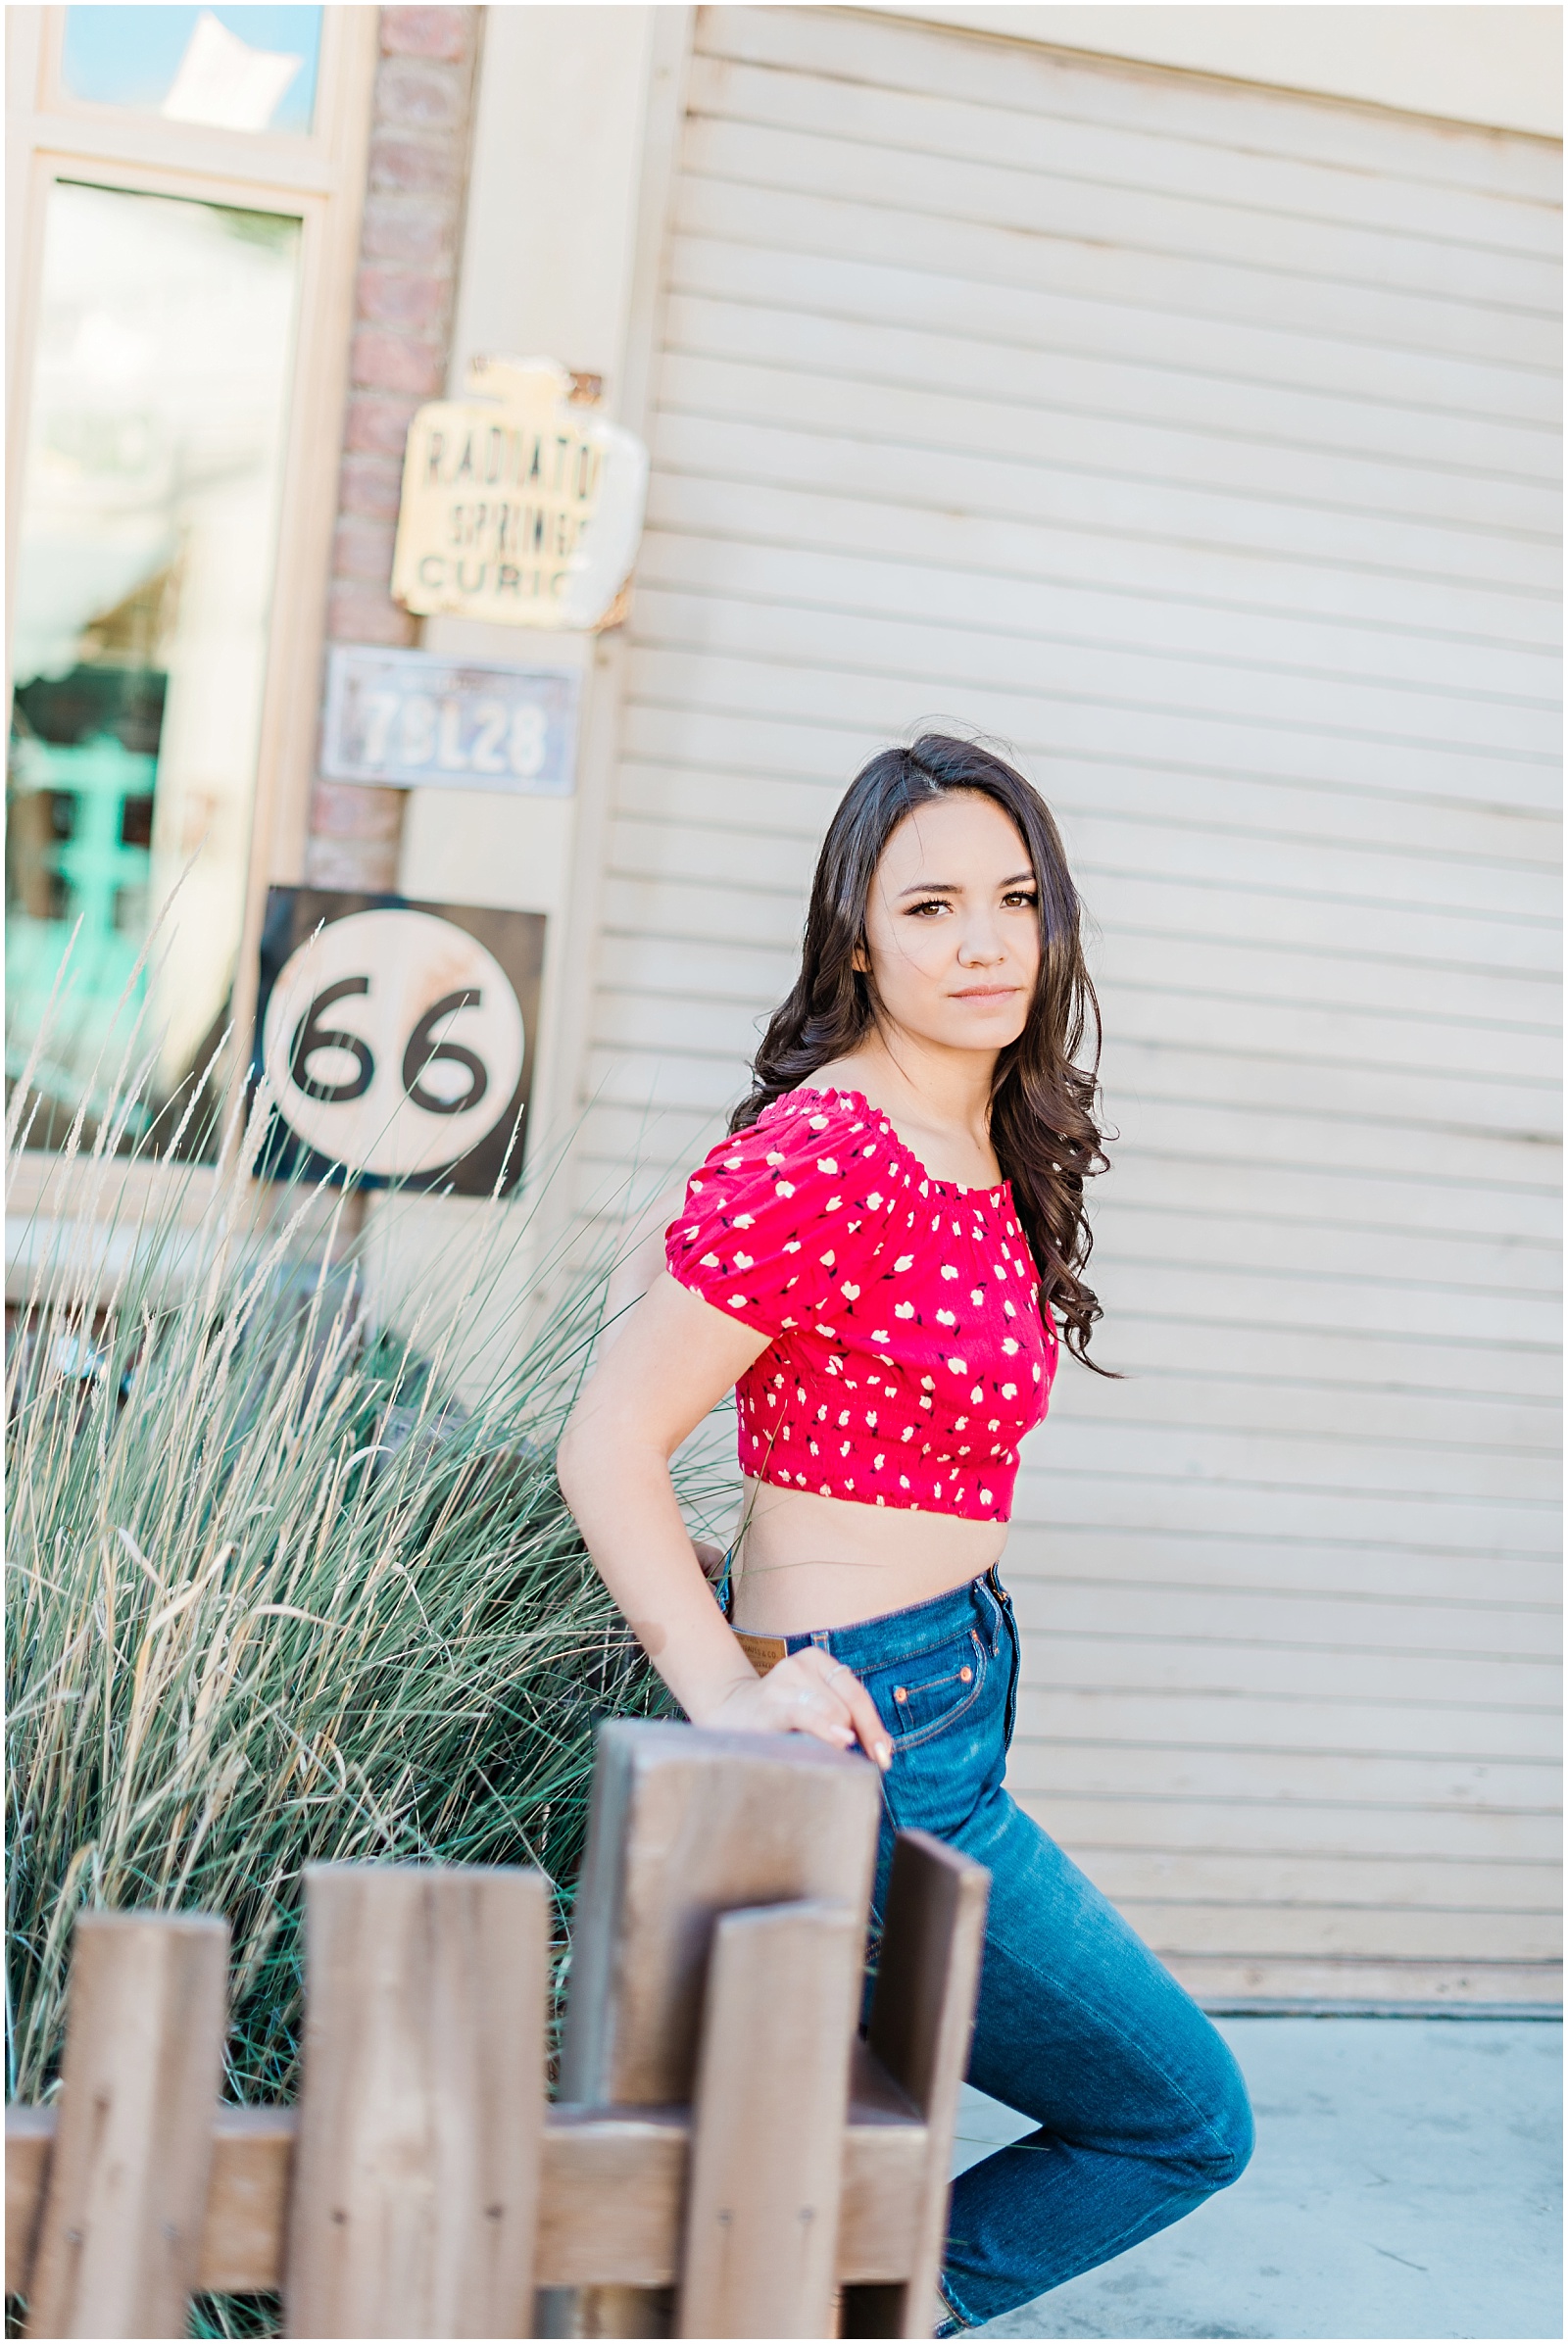 Disneyland Cars Land Senior Session. Images by Mollie Jane Photography. To see more go to www.molliejanephotography.com.